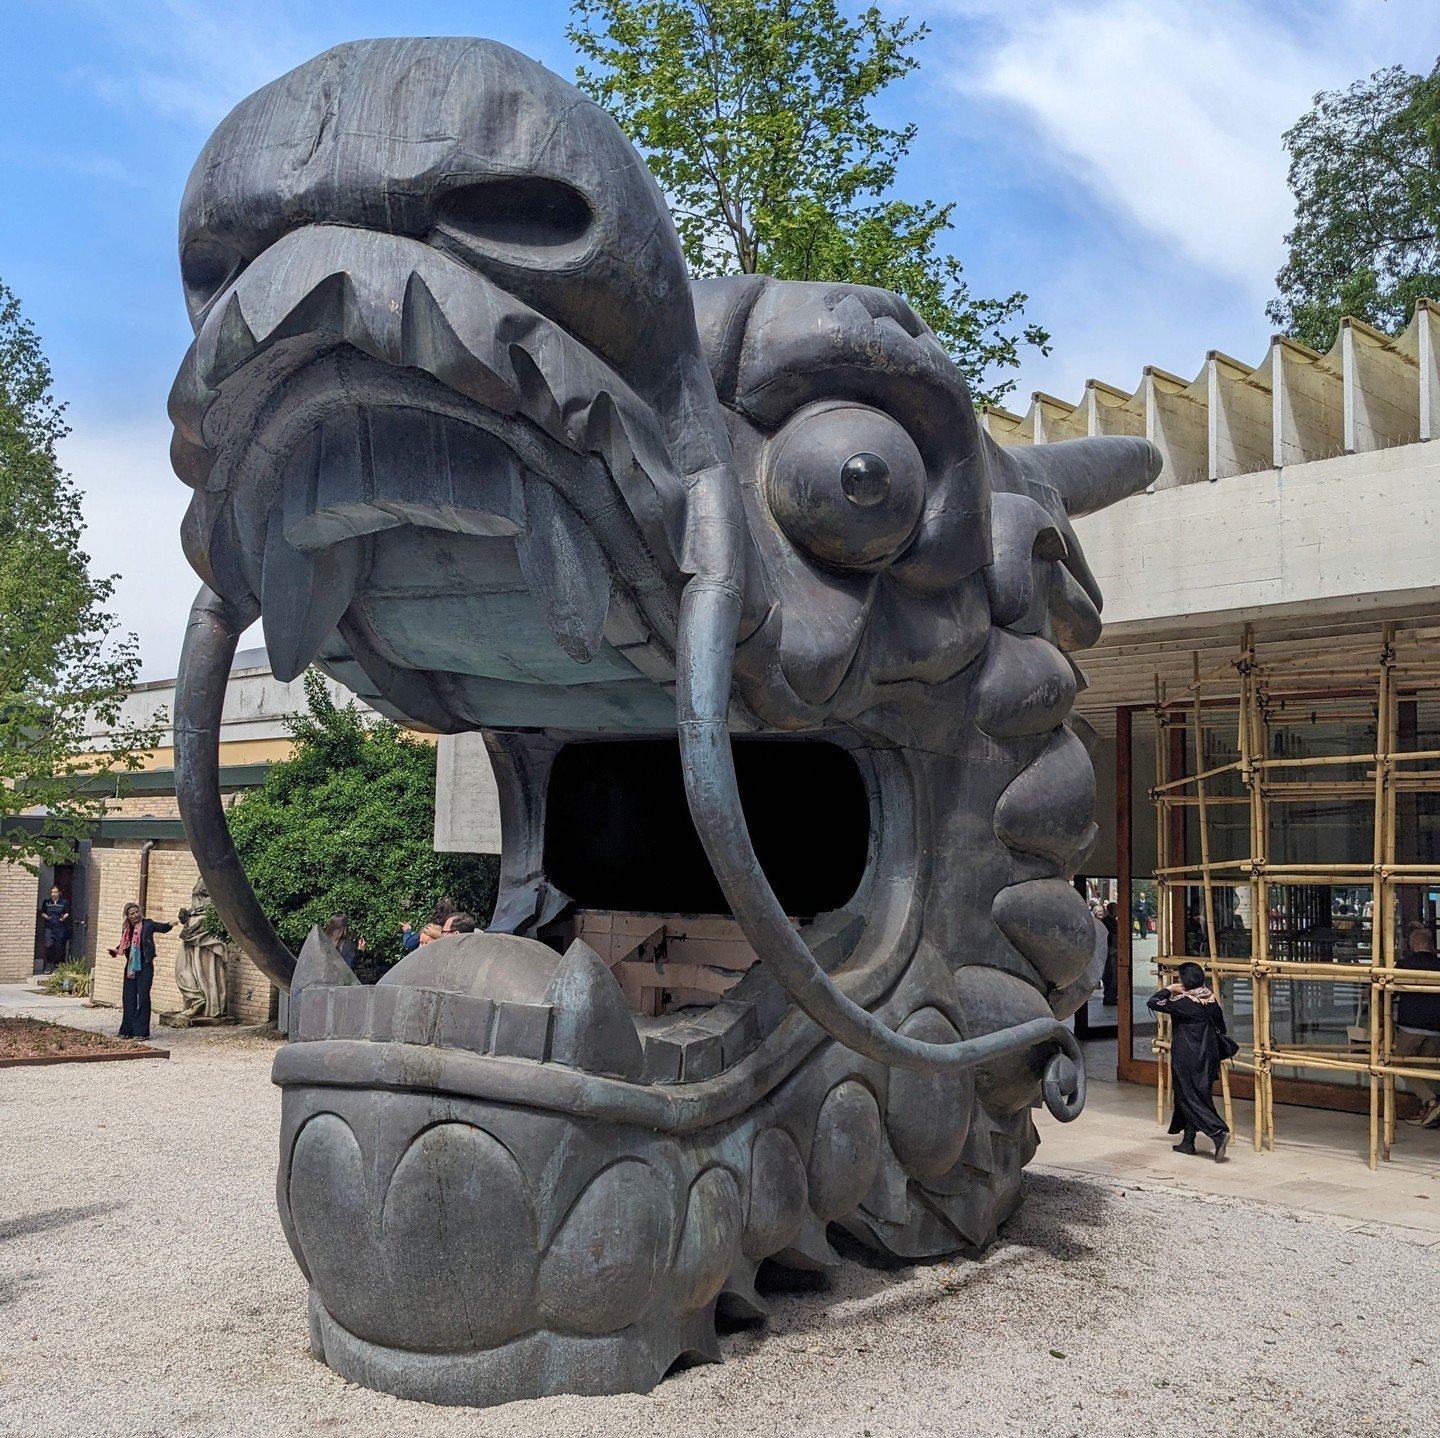 I&rsquo;ve written about my highlights from the Venice Biennale (@LaBiennale) for @WorldOfFAD, and here&rsquo;s some of my selections from the Giardini site of the Biennale: 

1. The dragon&rsquo;s head outside the Nordic pavilion, as part of Lap-See